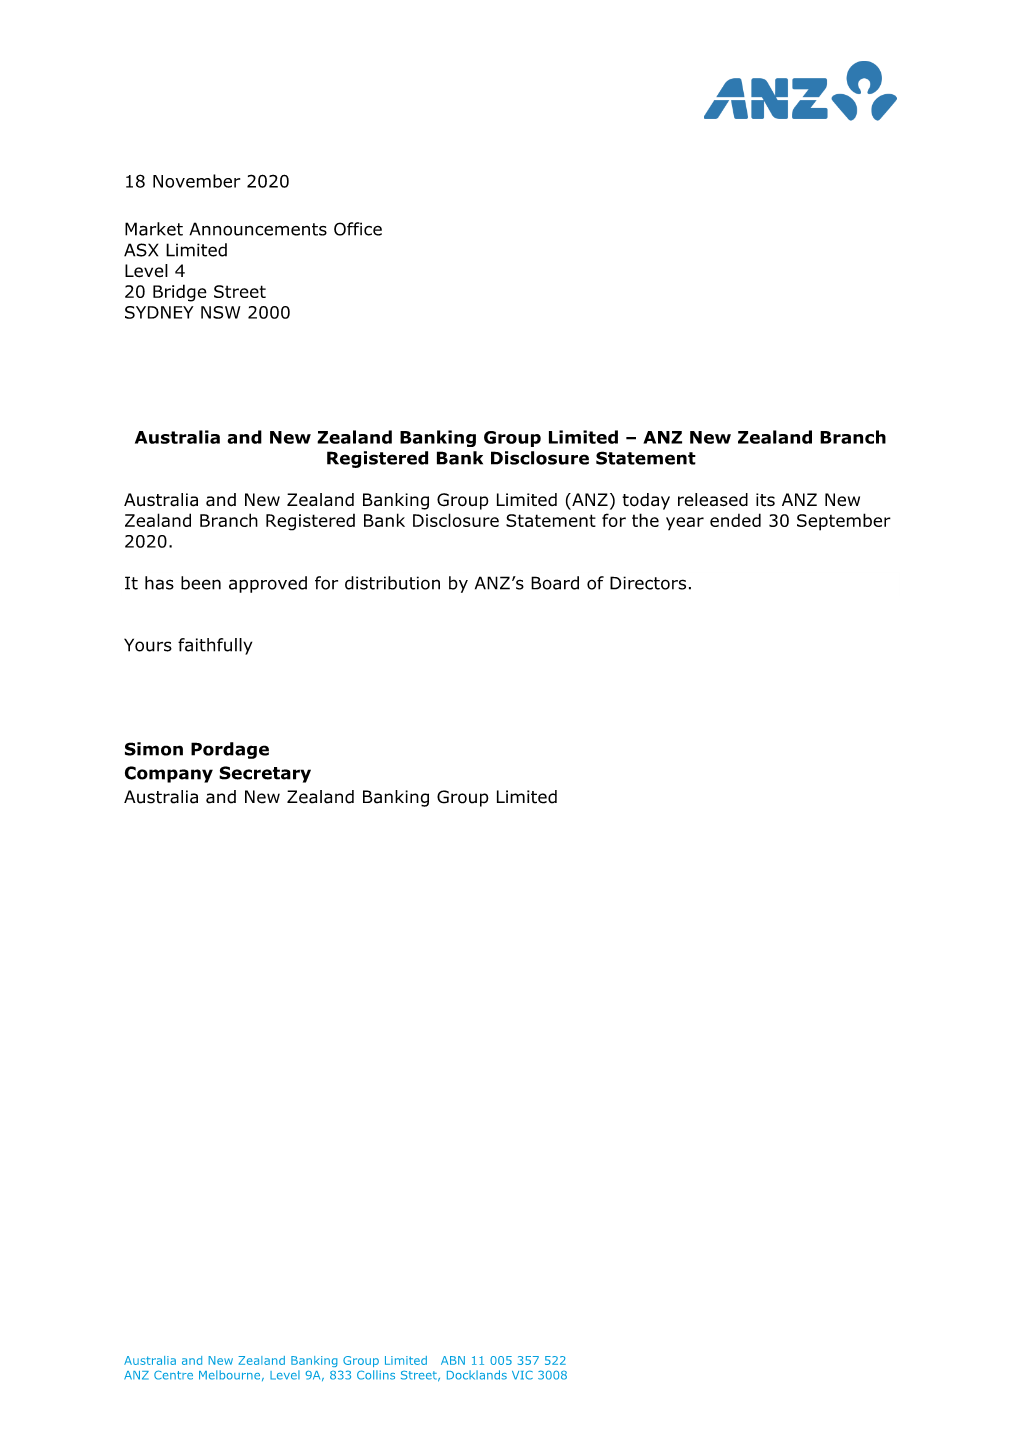 18 November 2020 Market Announcements Office ASX Limited